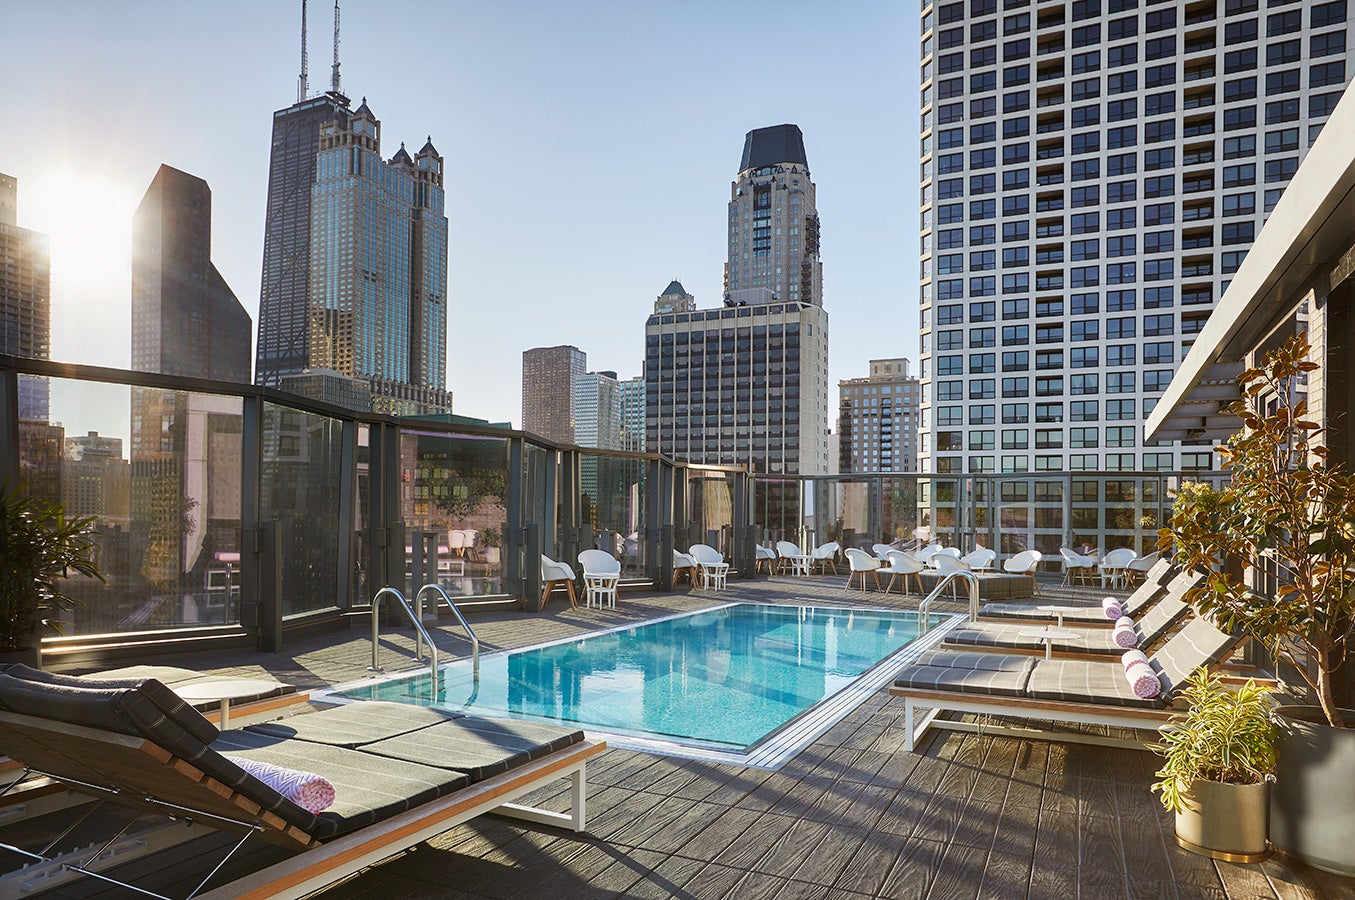 This urban resort boasts one of the city’s prized rooftop pools